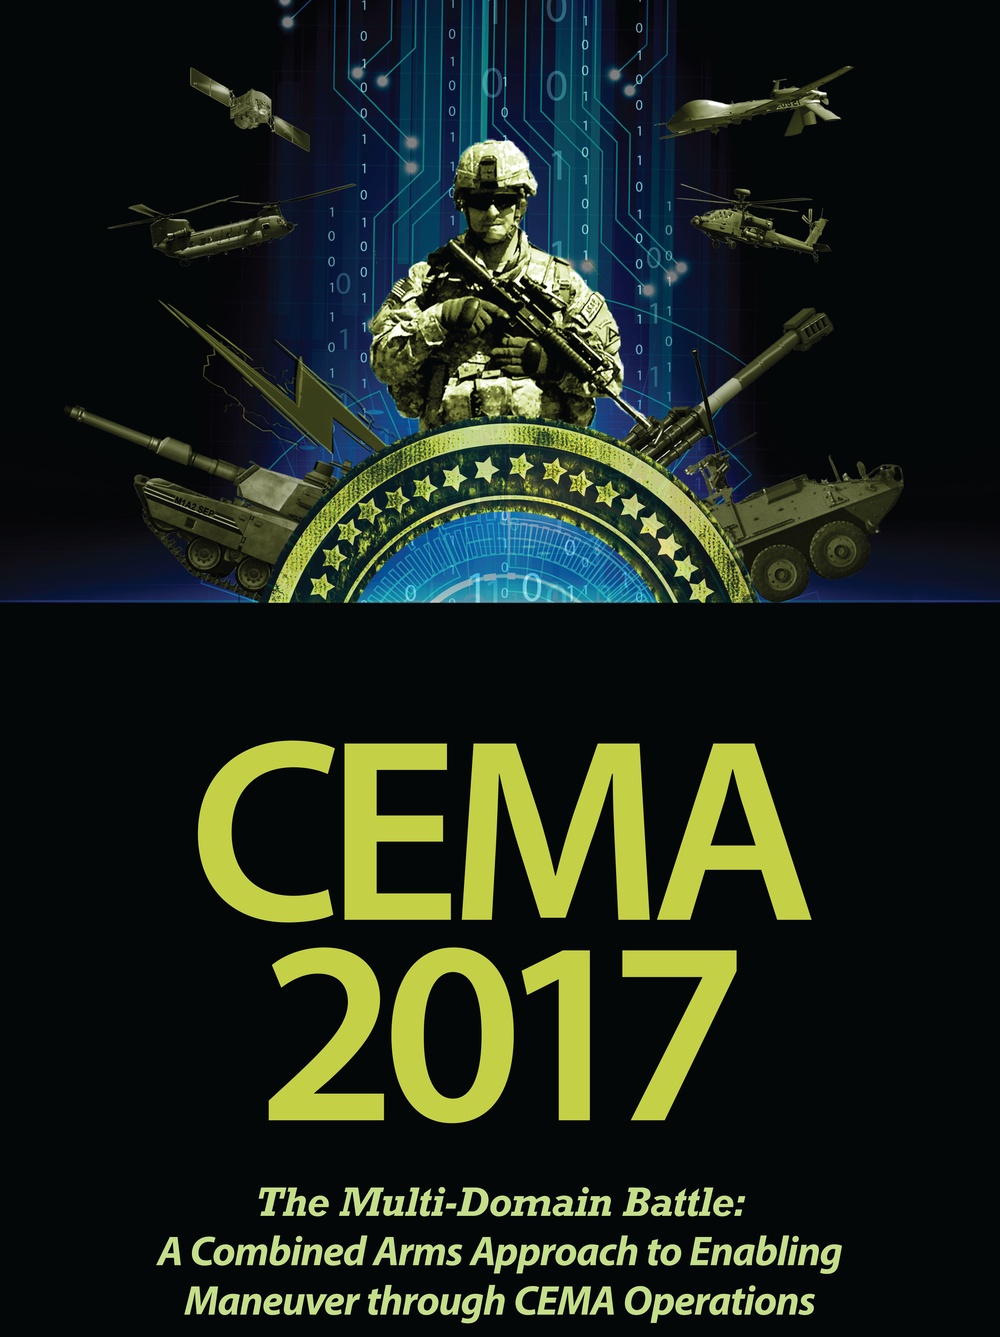 CEMA rallies experts, industry partners with current, next generation warfighters